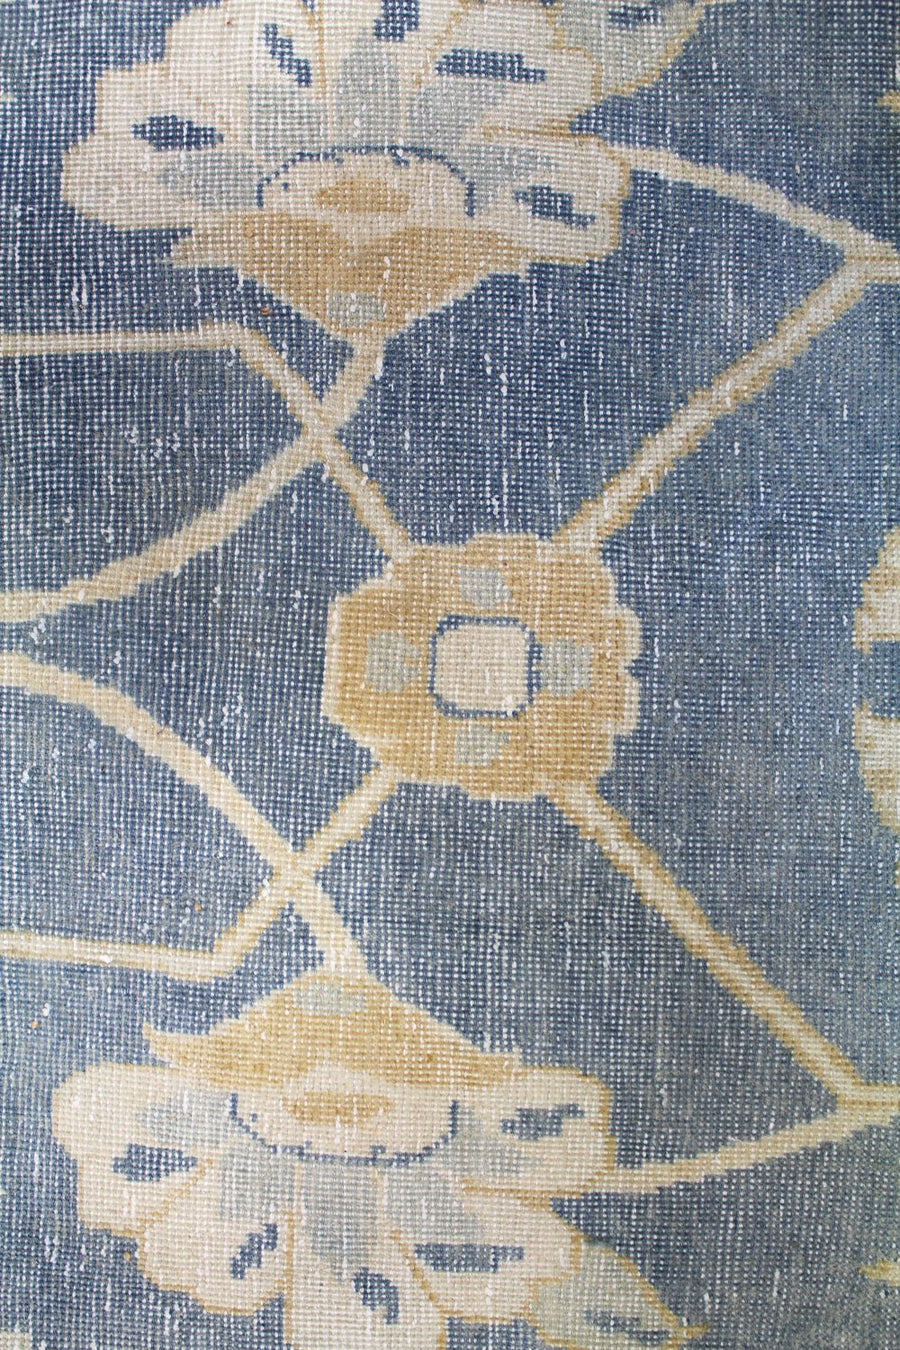 MAHAL HANDKNOTTED RUG, J58782